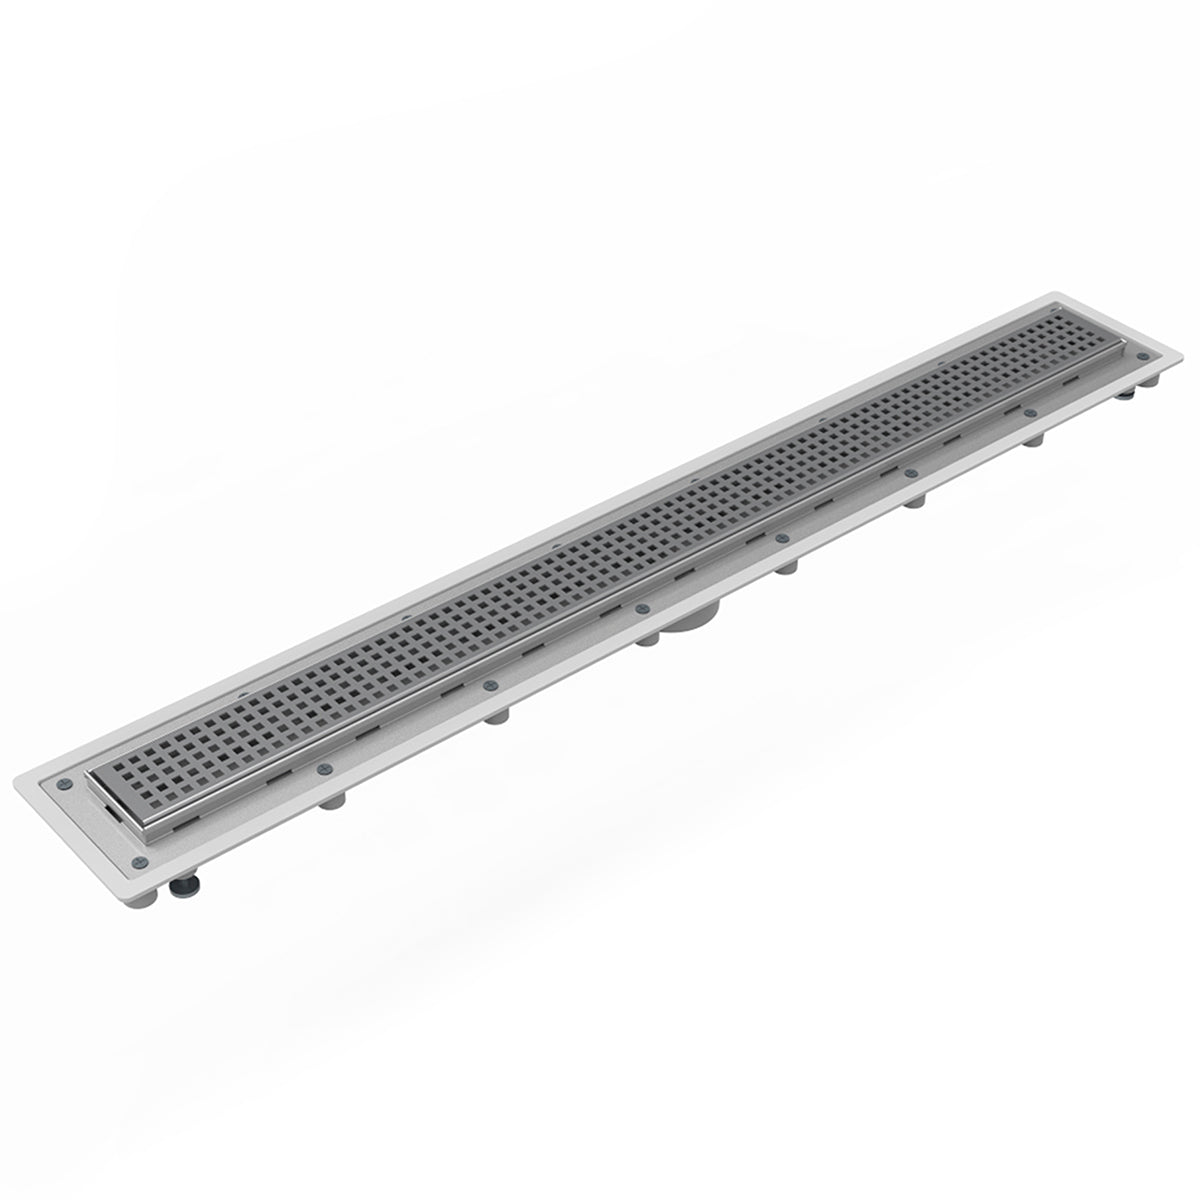 Infinity Drain 48" Universal Infinity Linear Drain Kit with PVC Channel and Squares Pattern Grate